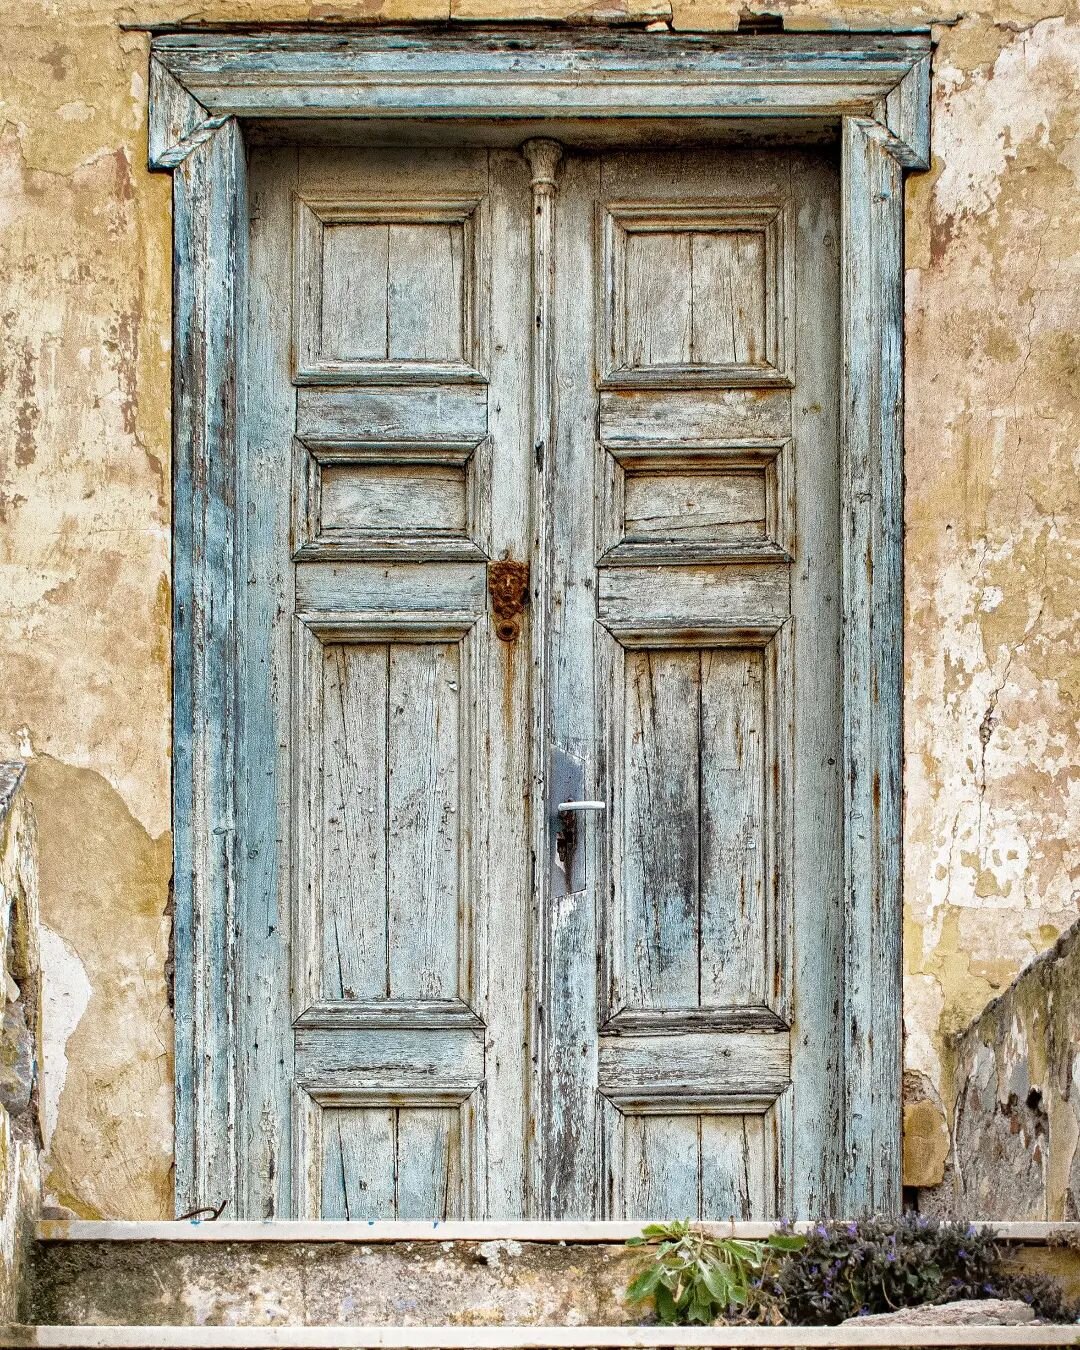 https://withinthemoment.etsy.com/listing/1408753116

Explore what lies beyond the blue door...

Step through to experience a whole world of magical photographic moments step by step with your guide #withinthemoment 

#etsy #artforsale #onlinegallery 